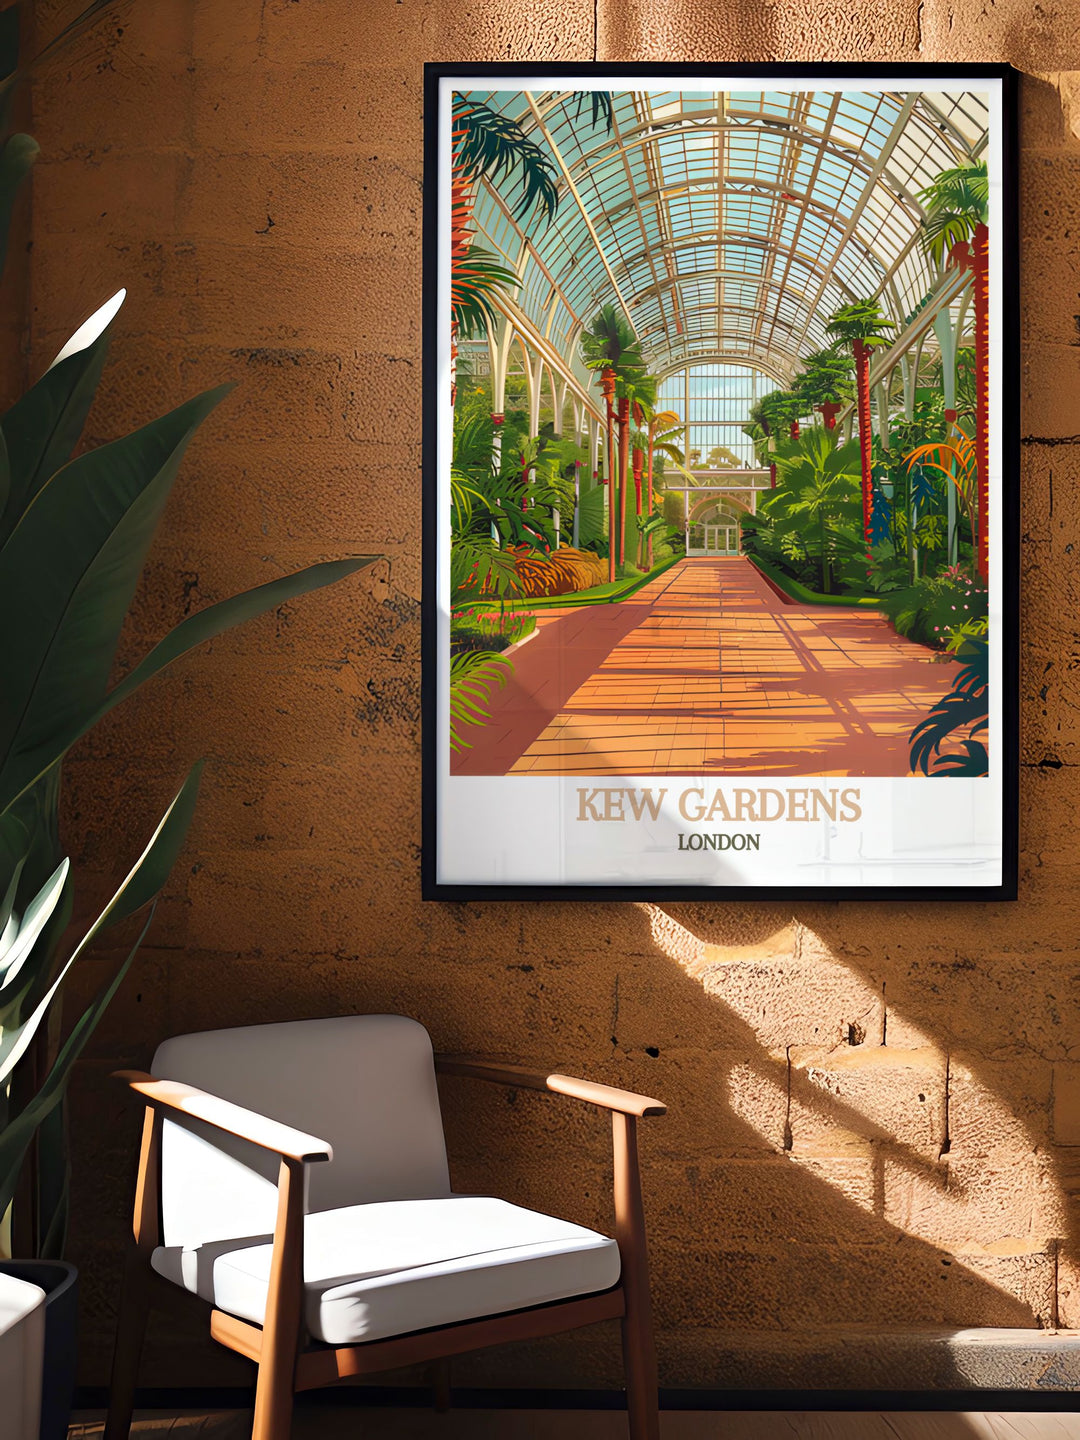 Highlighting the serene beauty of Kew Gardens Temperate House, this travel poster captures its lush greenery and architectural elegance. Perfect for those who appreciate unique horticultural displays, this artwork brings the essence of England into your home.